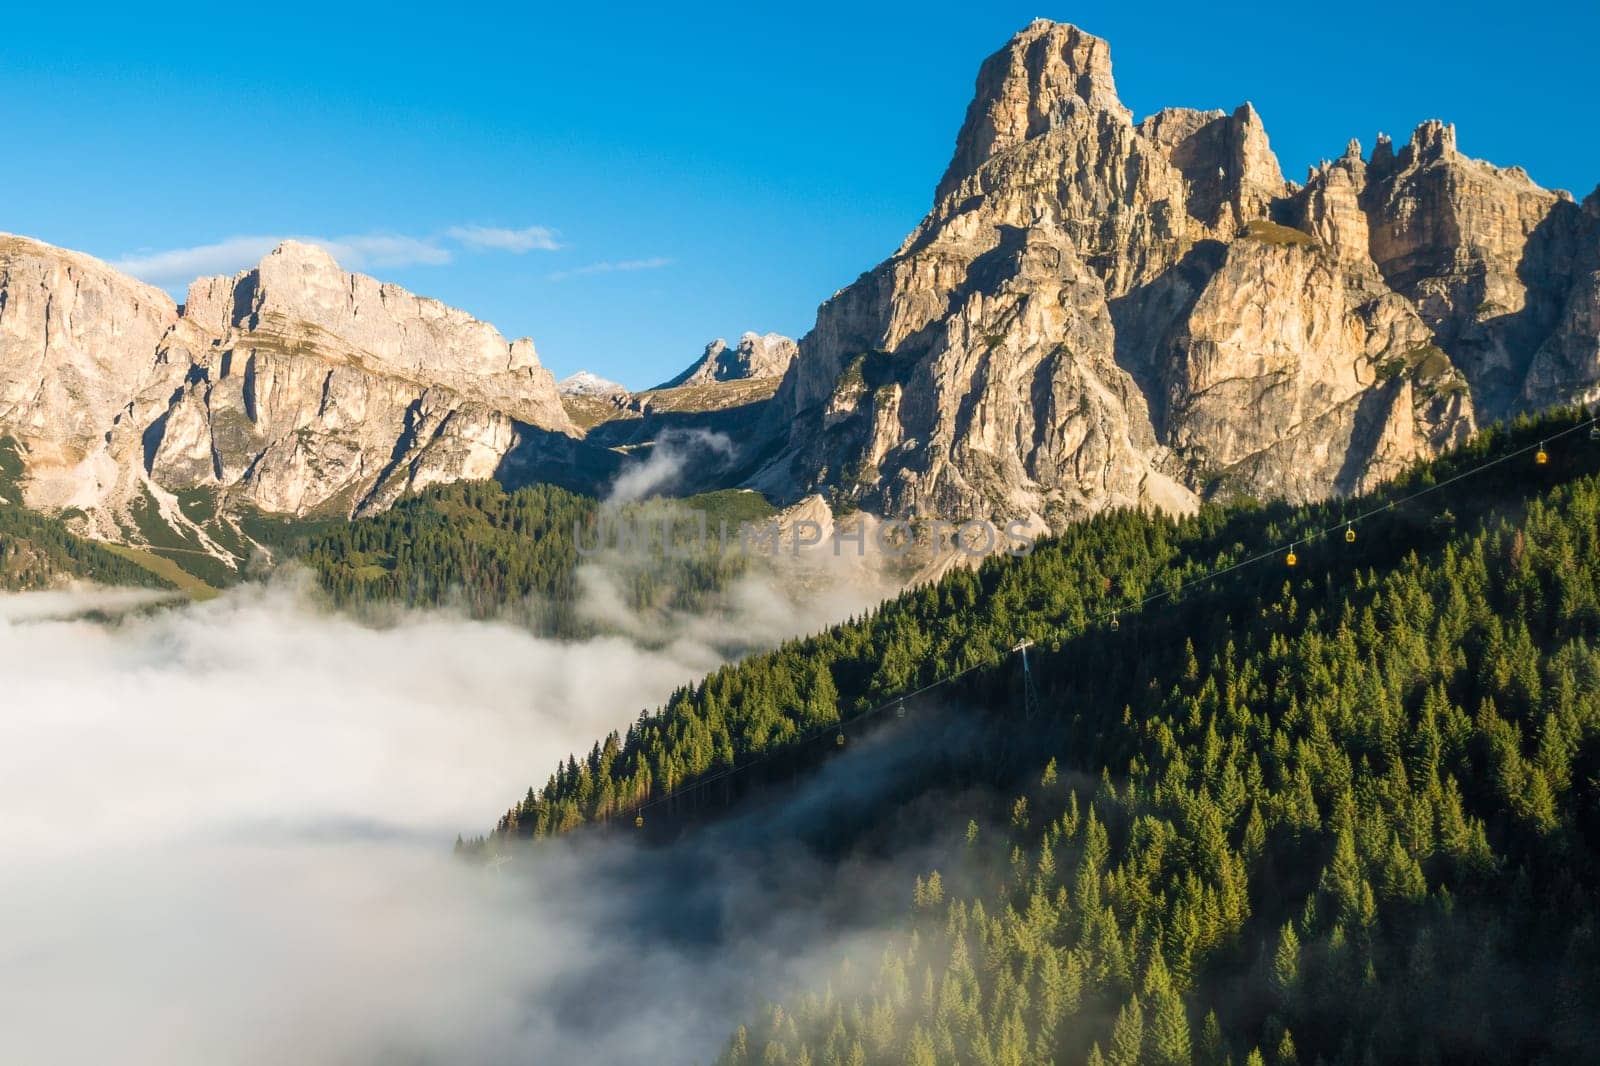 Rocky peak of giant Alps rises against clear blue sky at sunrise. Dense fog envelops high mountains in a captivating aerial view on a sunny summer morning